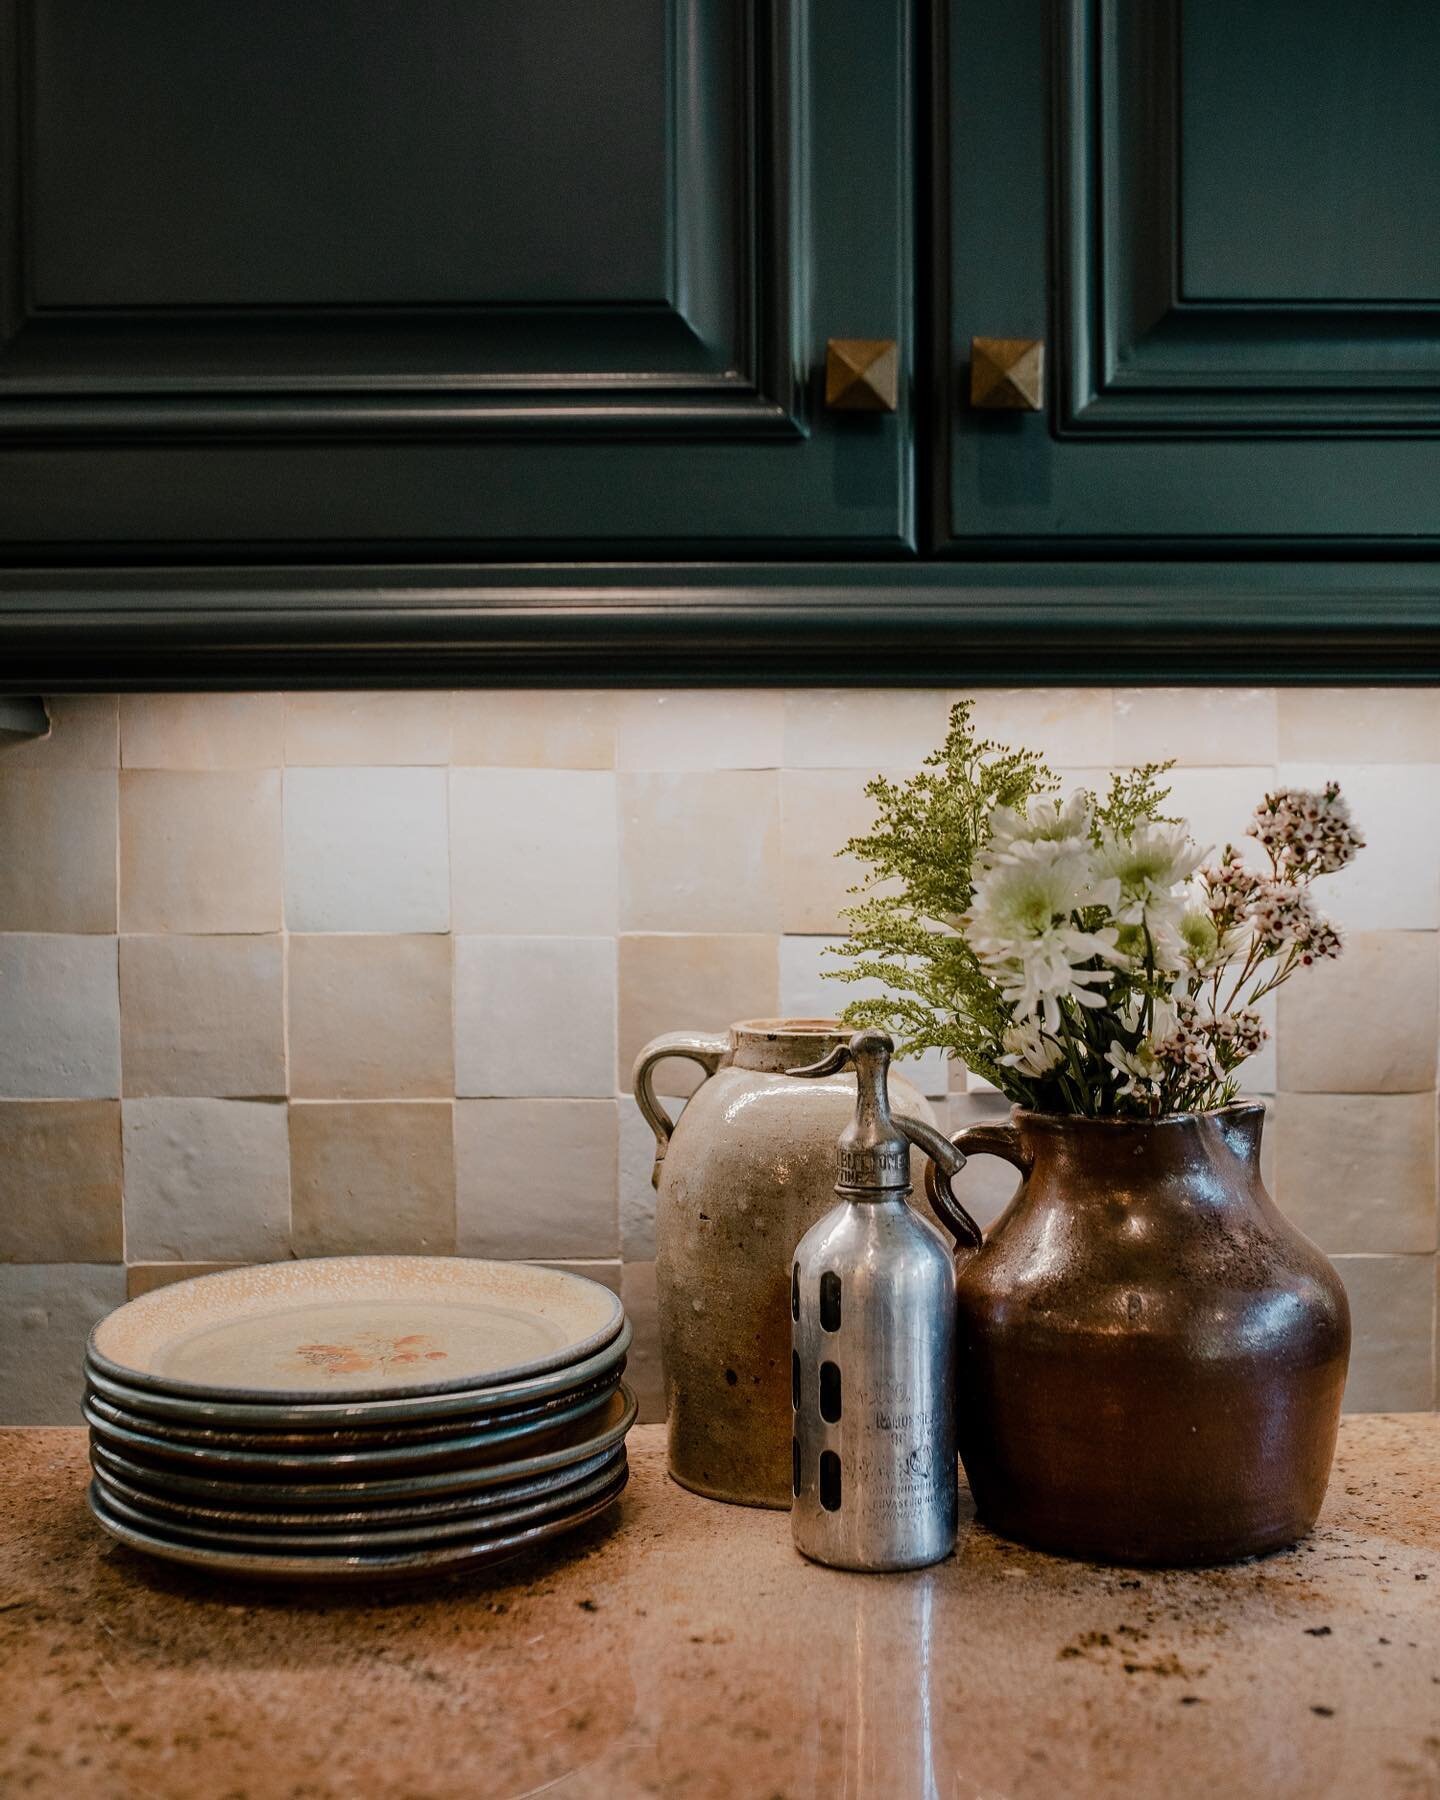 This backsplash from @cletile makes this moody kitchen design perfectly imperfect. ⁠⁠
⁠⁠
📸: @marylizomel